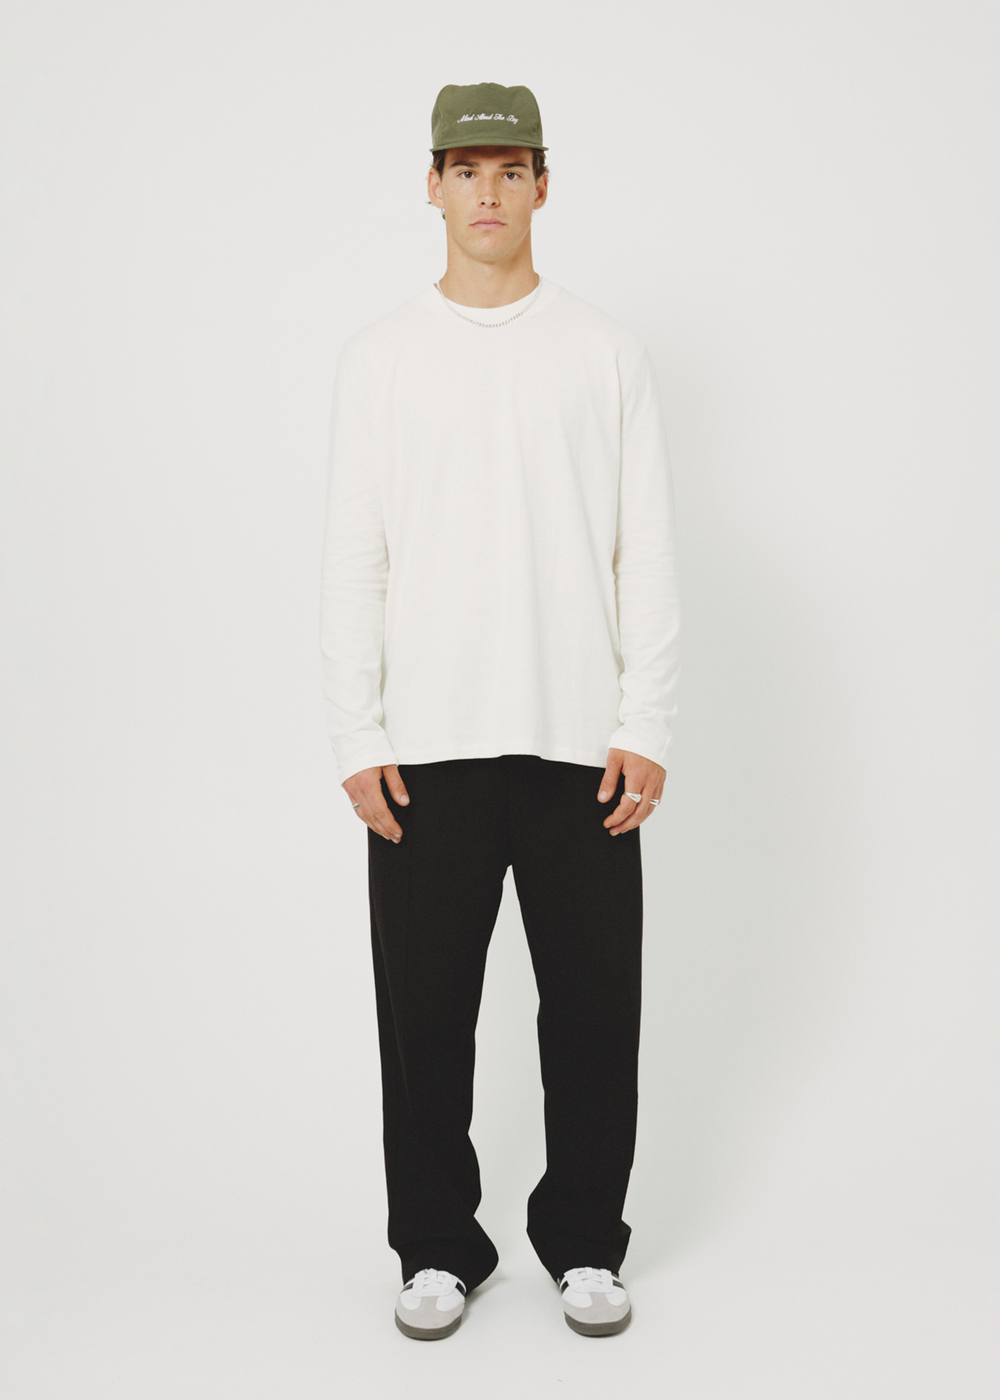 HEMP JERSEY LS / RICE WHITE | COMMONERS | Mad About The Boy